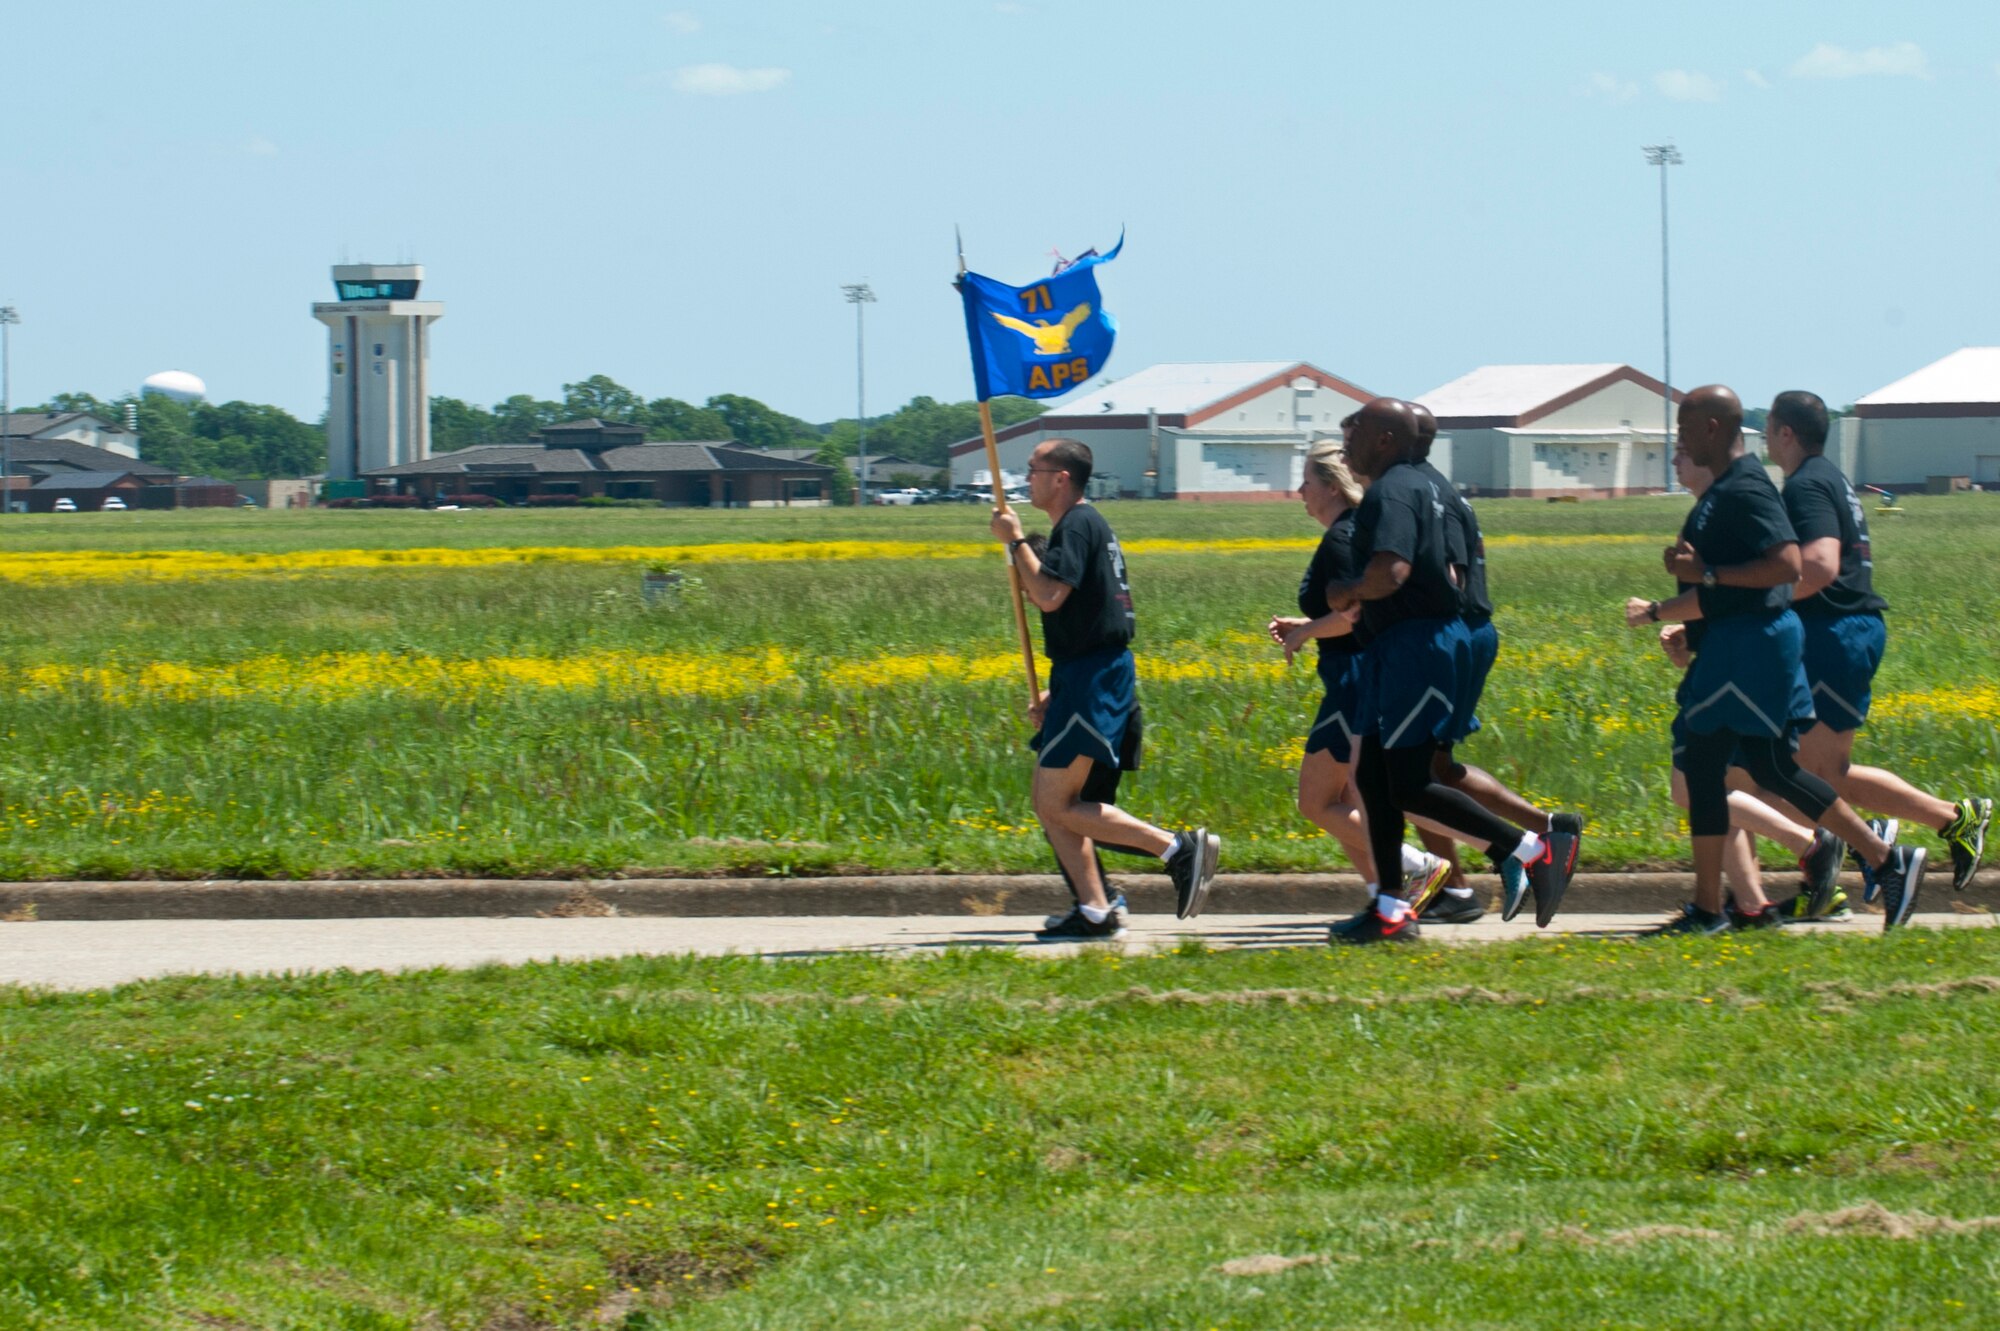 U.S. Air Force Reserves Airmen assigned to the 71st Aerial Port Squadron run in formation during a memorial ceremony at Langley Air Force Base, Va., May 14, 2016. The 71st APS is an Air Force Reserve unit that provides the military logistical functions of processing personnel and cargo, rigging for airdrop and packing parachutes. (U.S. Air Force photo by Staff Sgt. R. Alex Durbin)